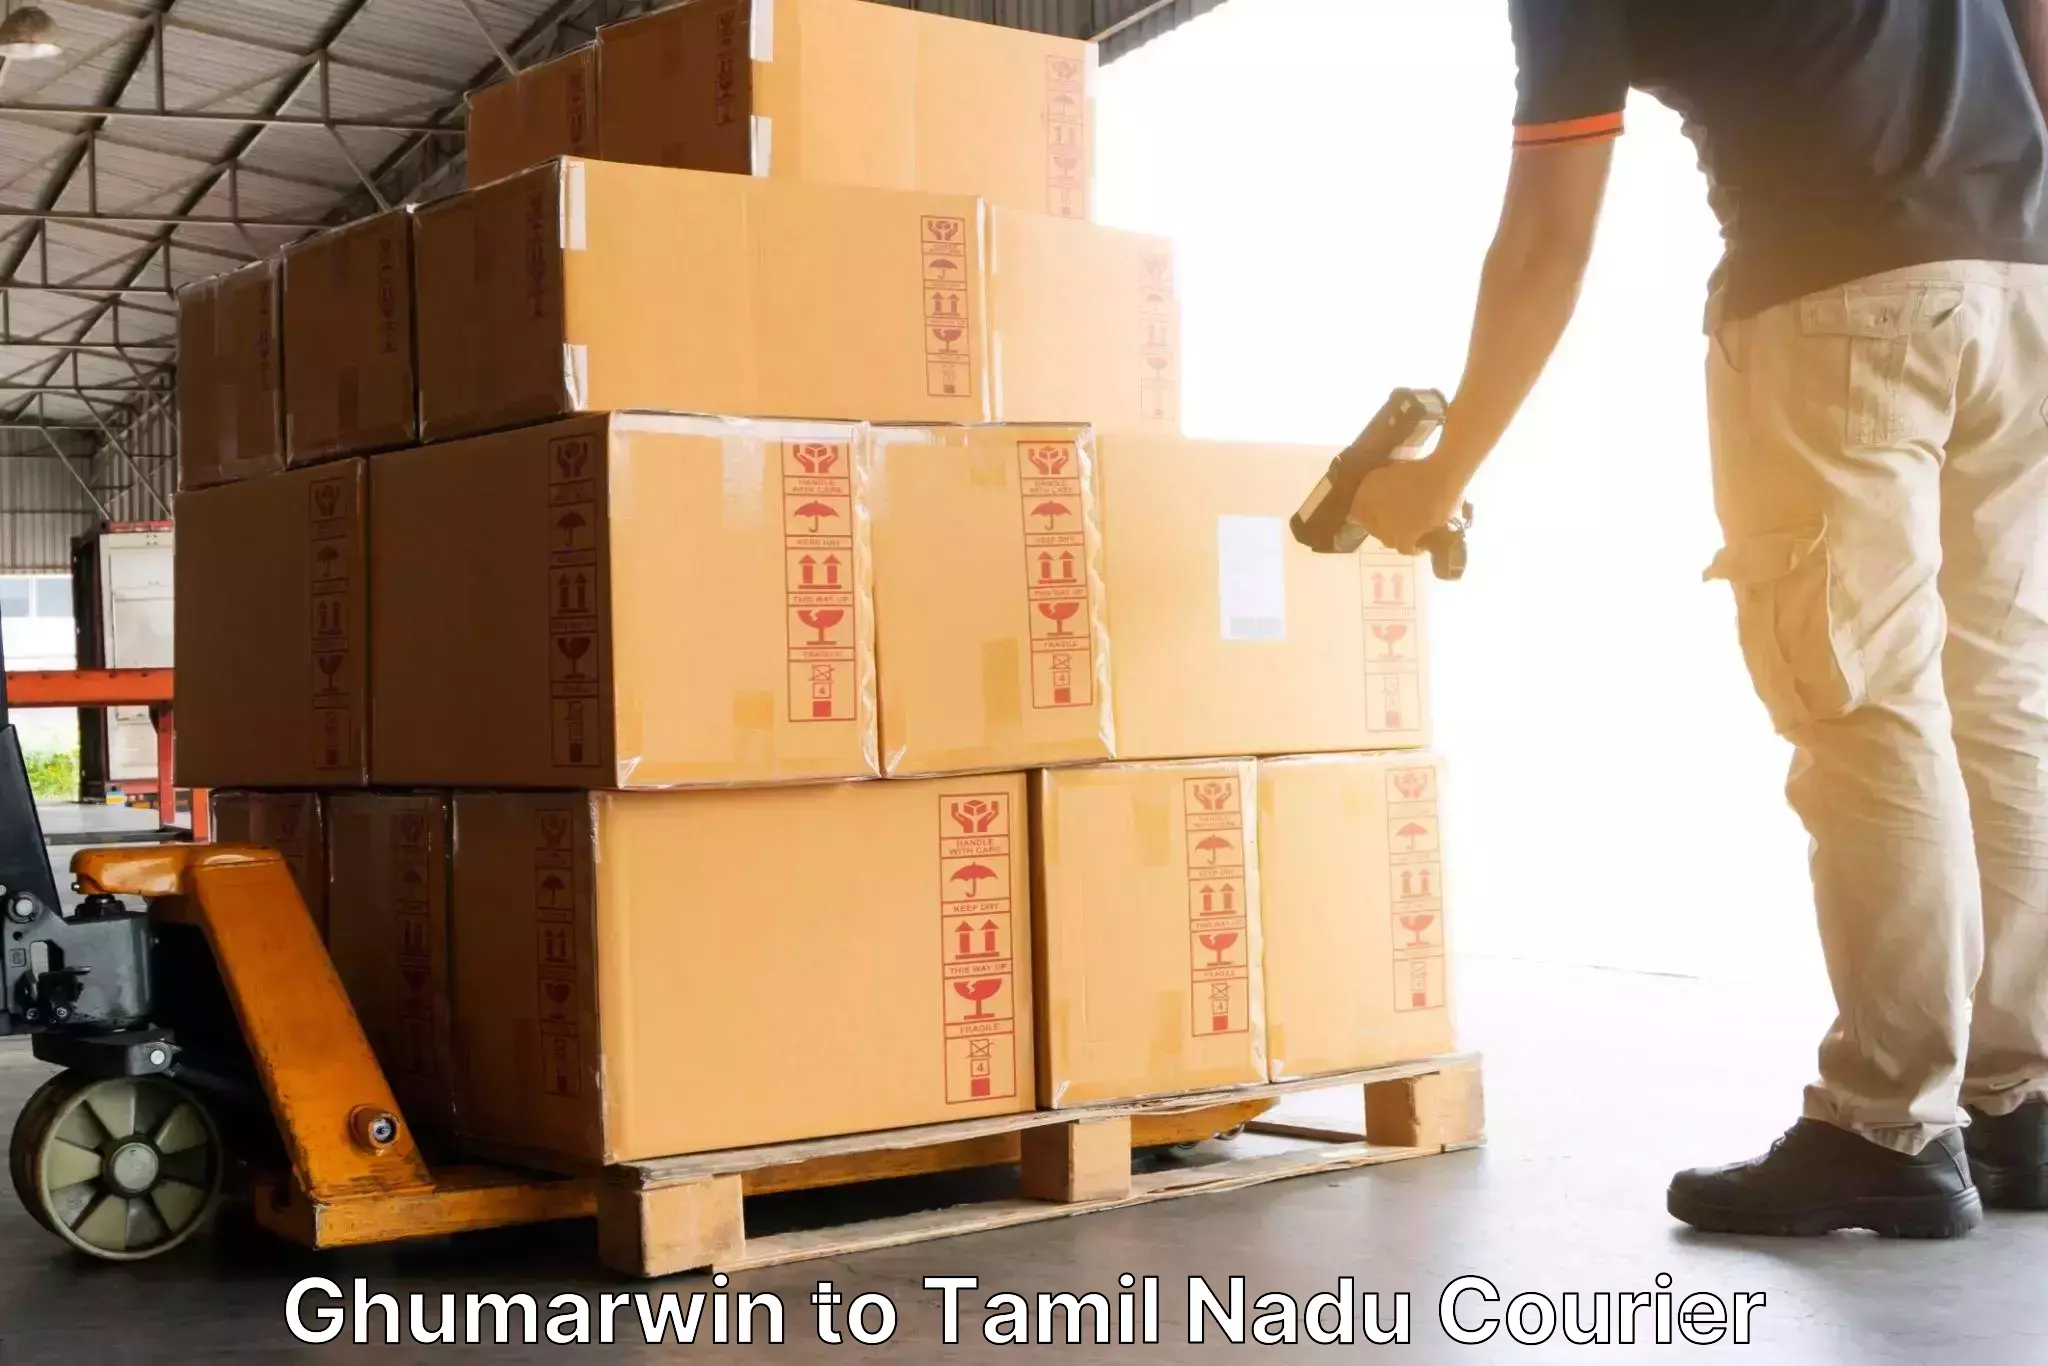 Nationwide shipping coverage Ghumarwin to Coimbatore